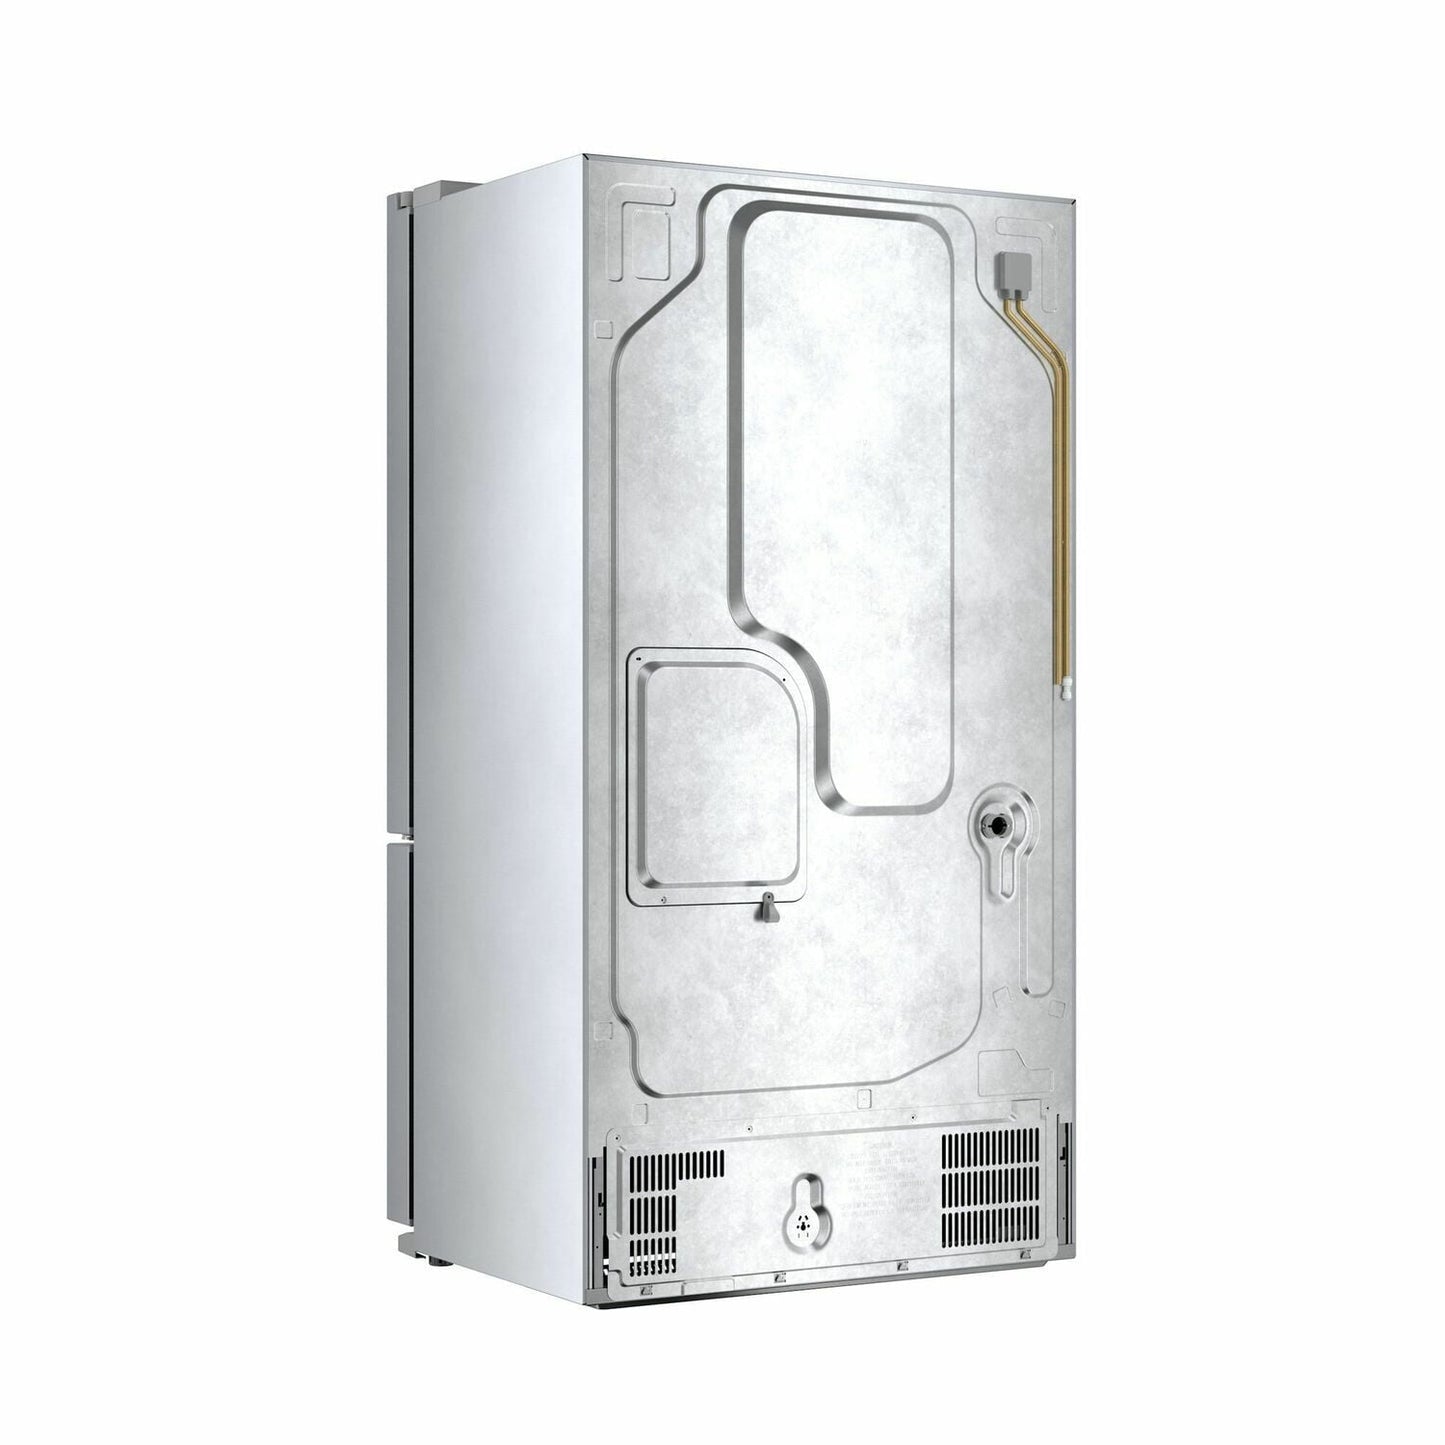 Bosch B21CT80SNS 800 Series French Door Bottom Mount Refrigerator 36'' Easy Clean Stainless Steel B21Ct80Sns